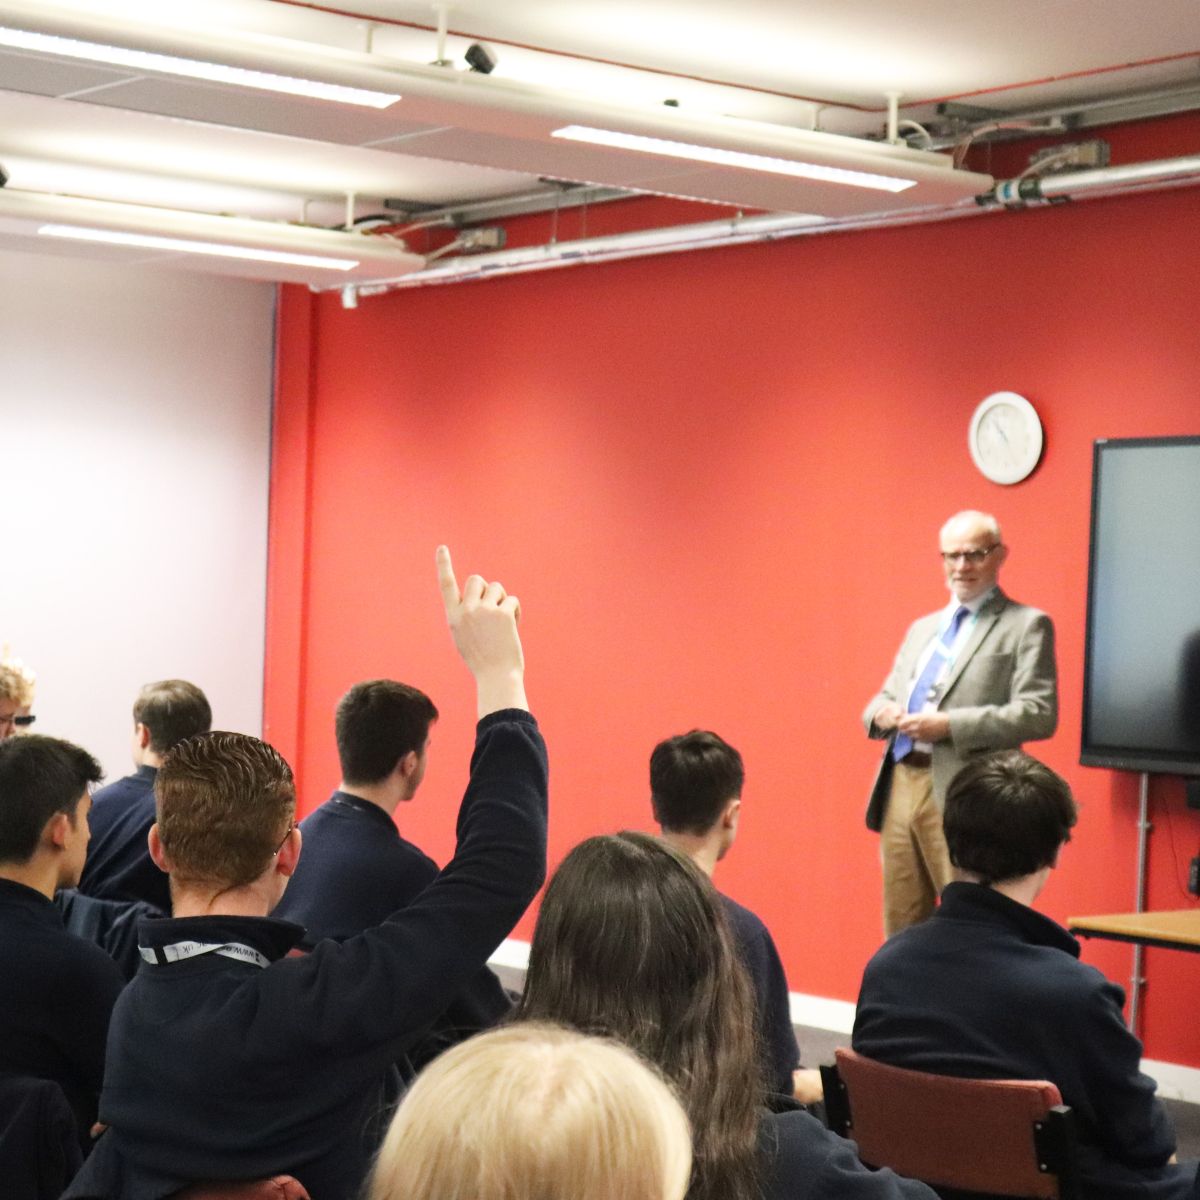 Public Services students at East Surrey College speak to Crispin Blunt MP.